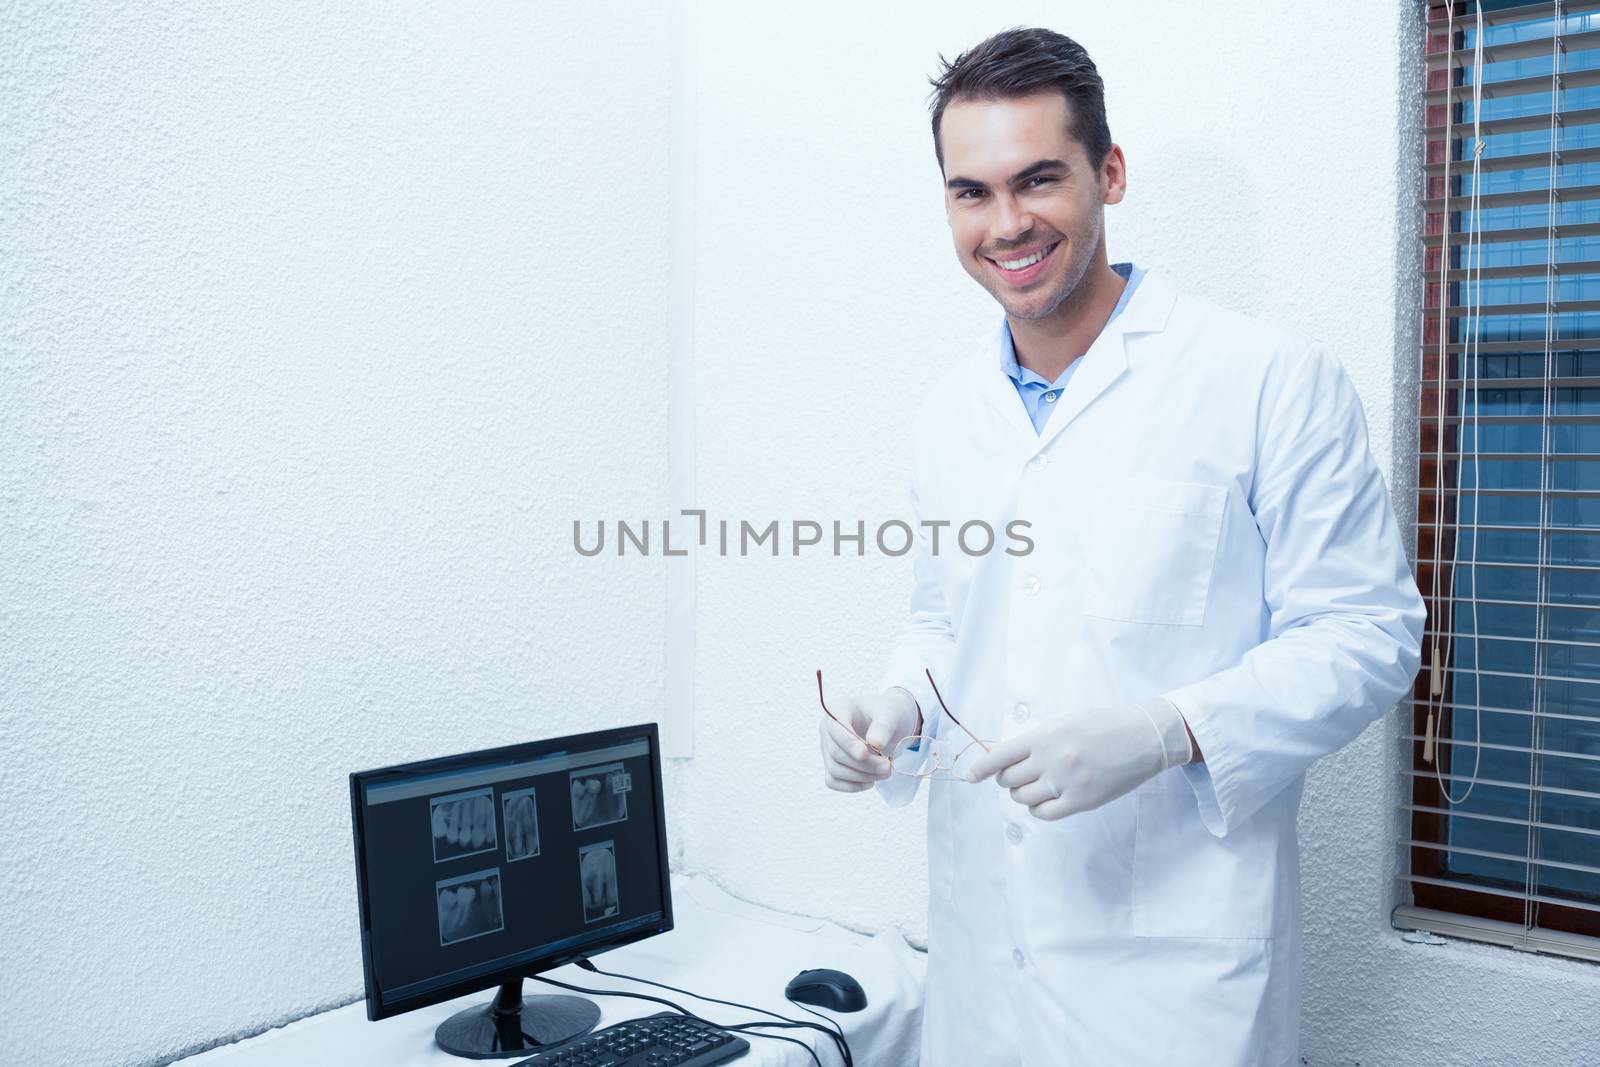 Portrait of smiling male dentist with computer monitor